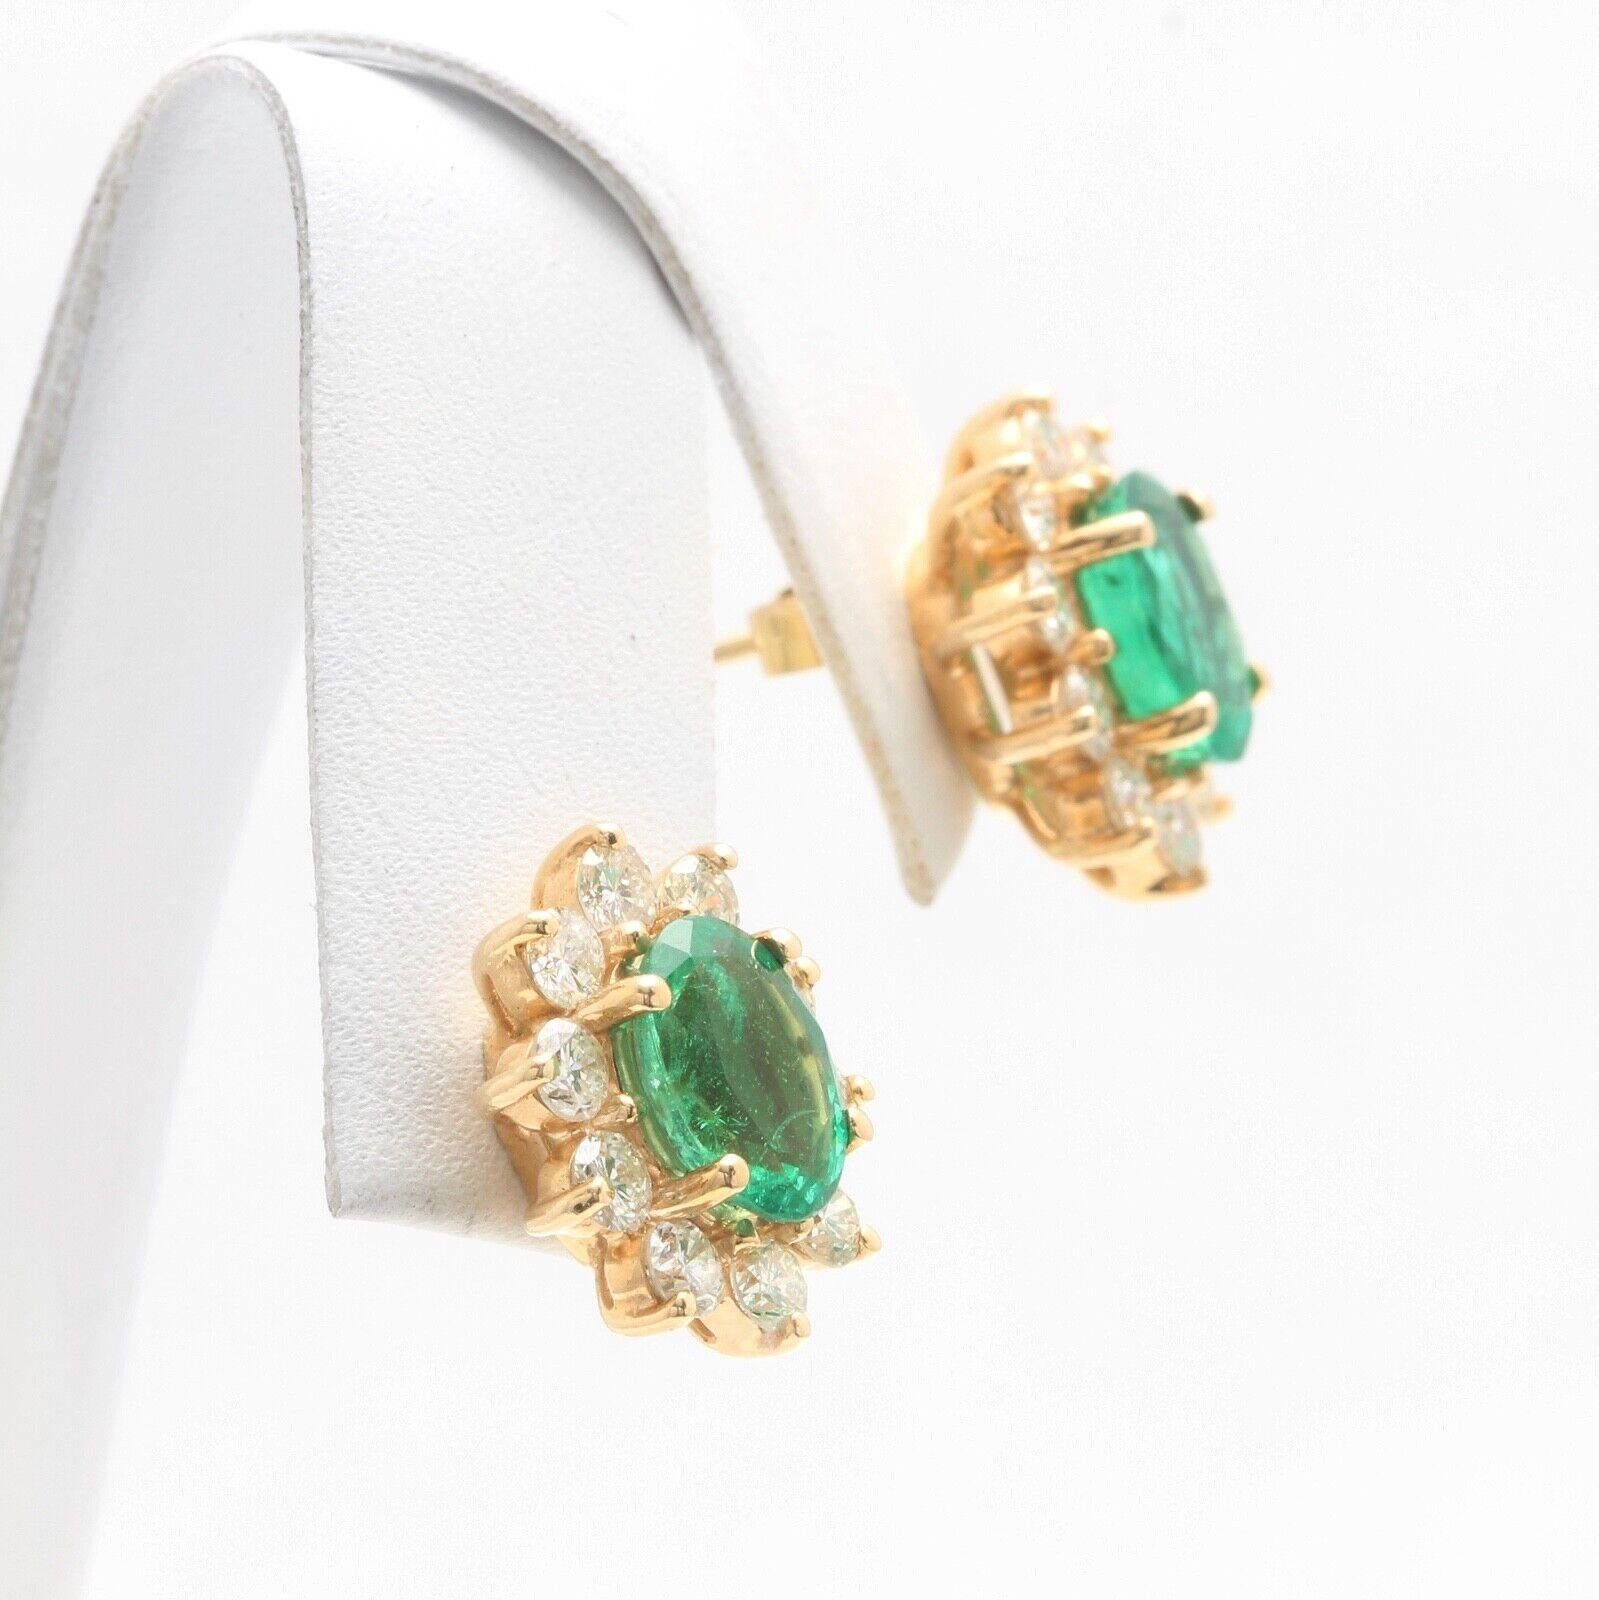 ESTATE 3.30 Carats Natural Emerald and Diamond 14K Solid Yellow Gold Earrings

Amazing looking piece! 

Suggested Replacement Value Approx. $7,000.00

Total Natural Round Cut White Diamonds Weight: Approx. 1.30 Carats (color J-K / Clarity